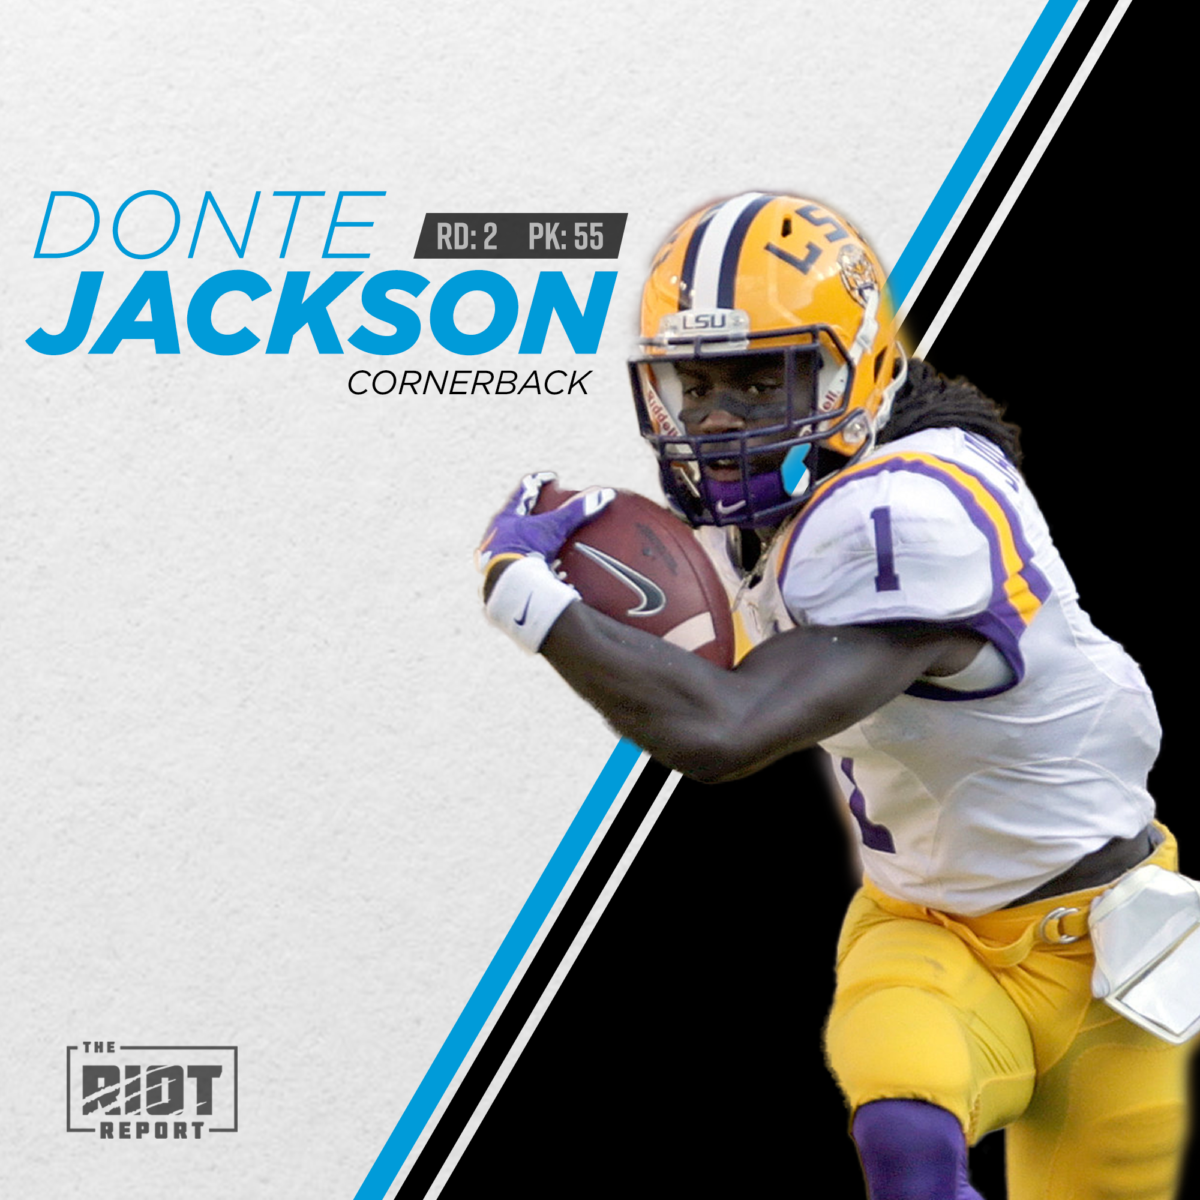 The Panthers Have Drafted CB Donte Jackson